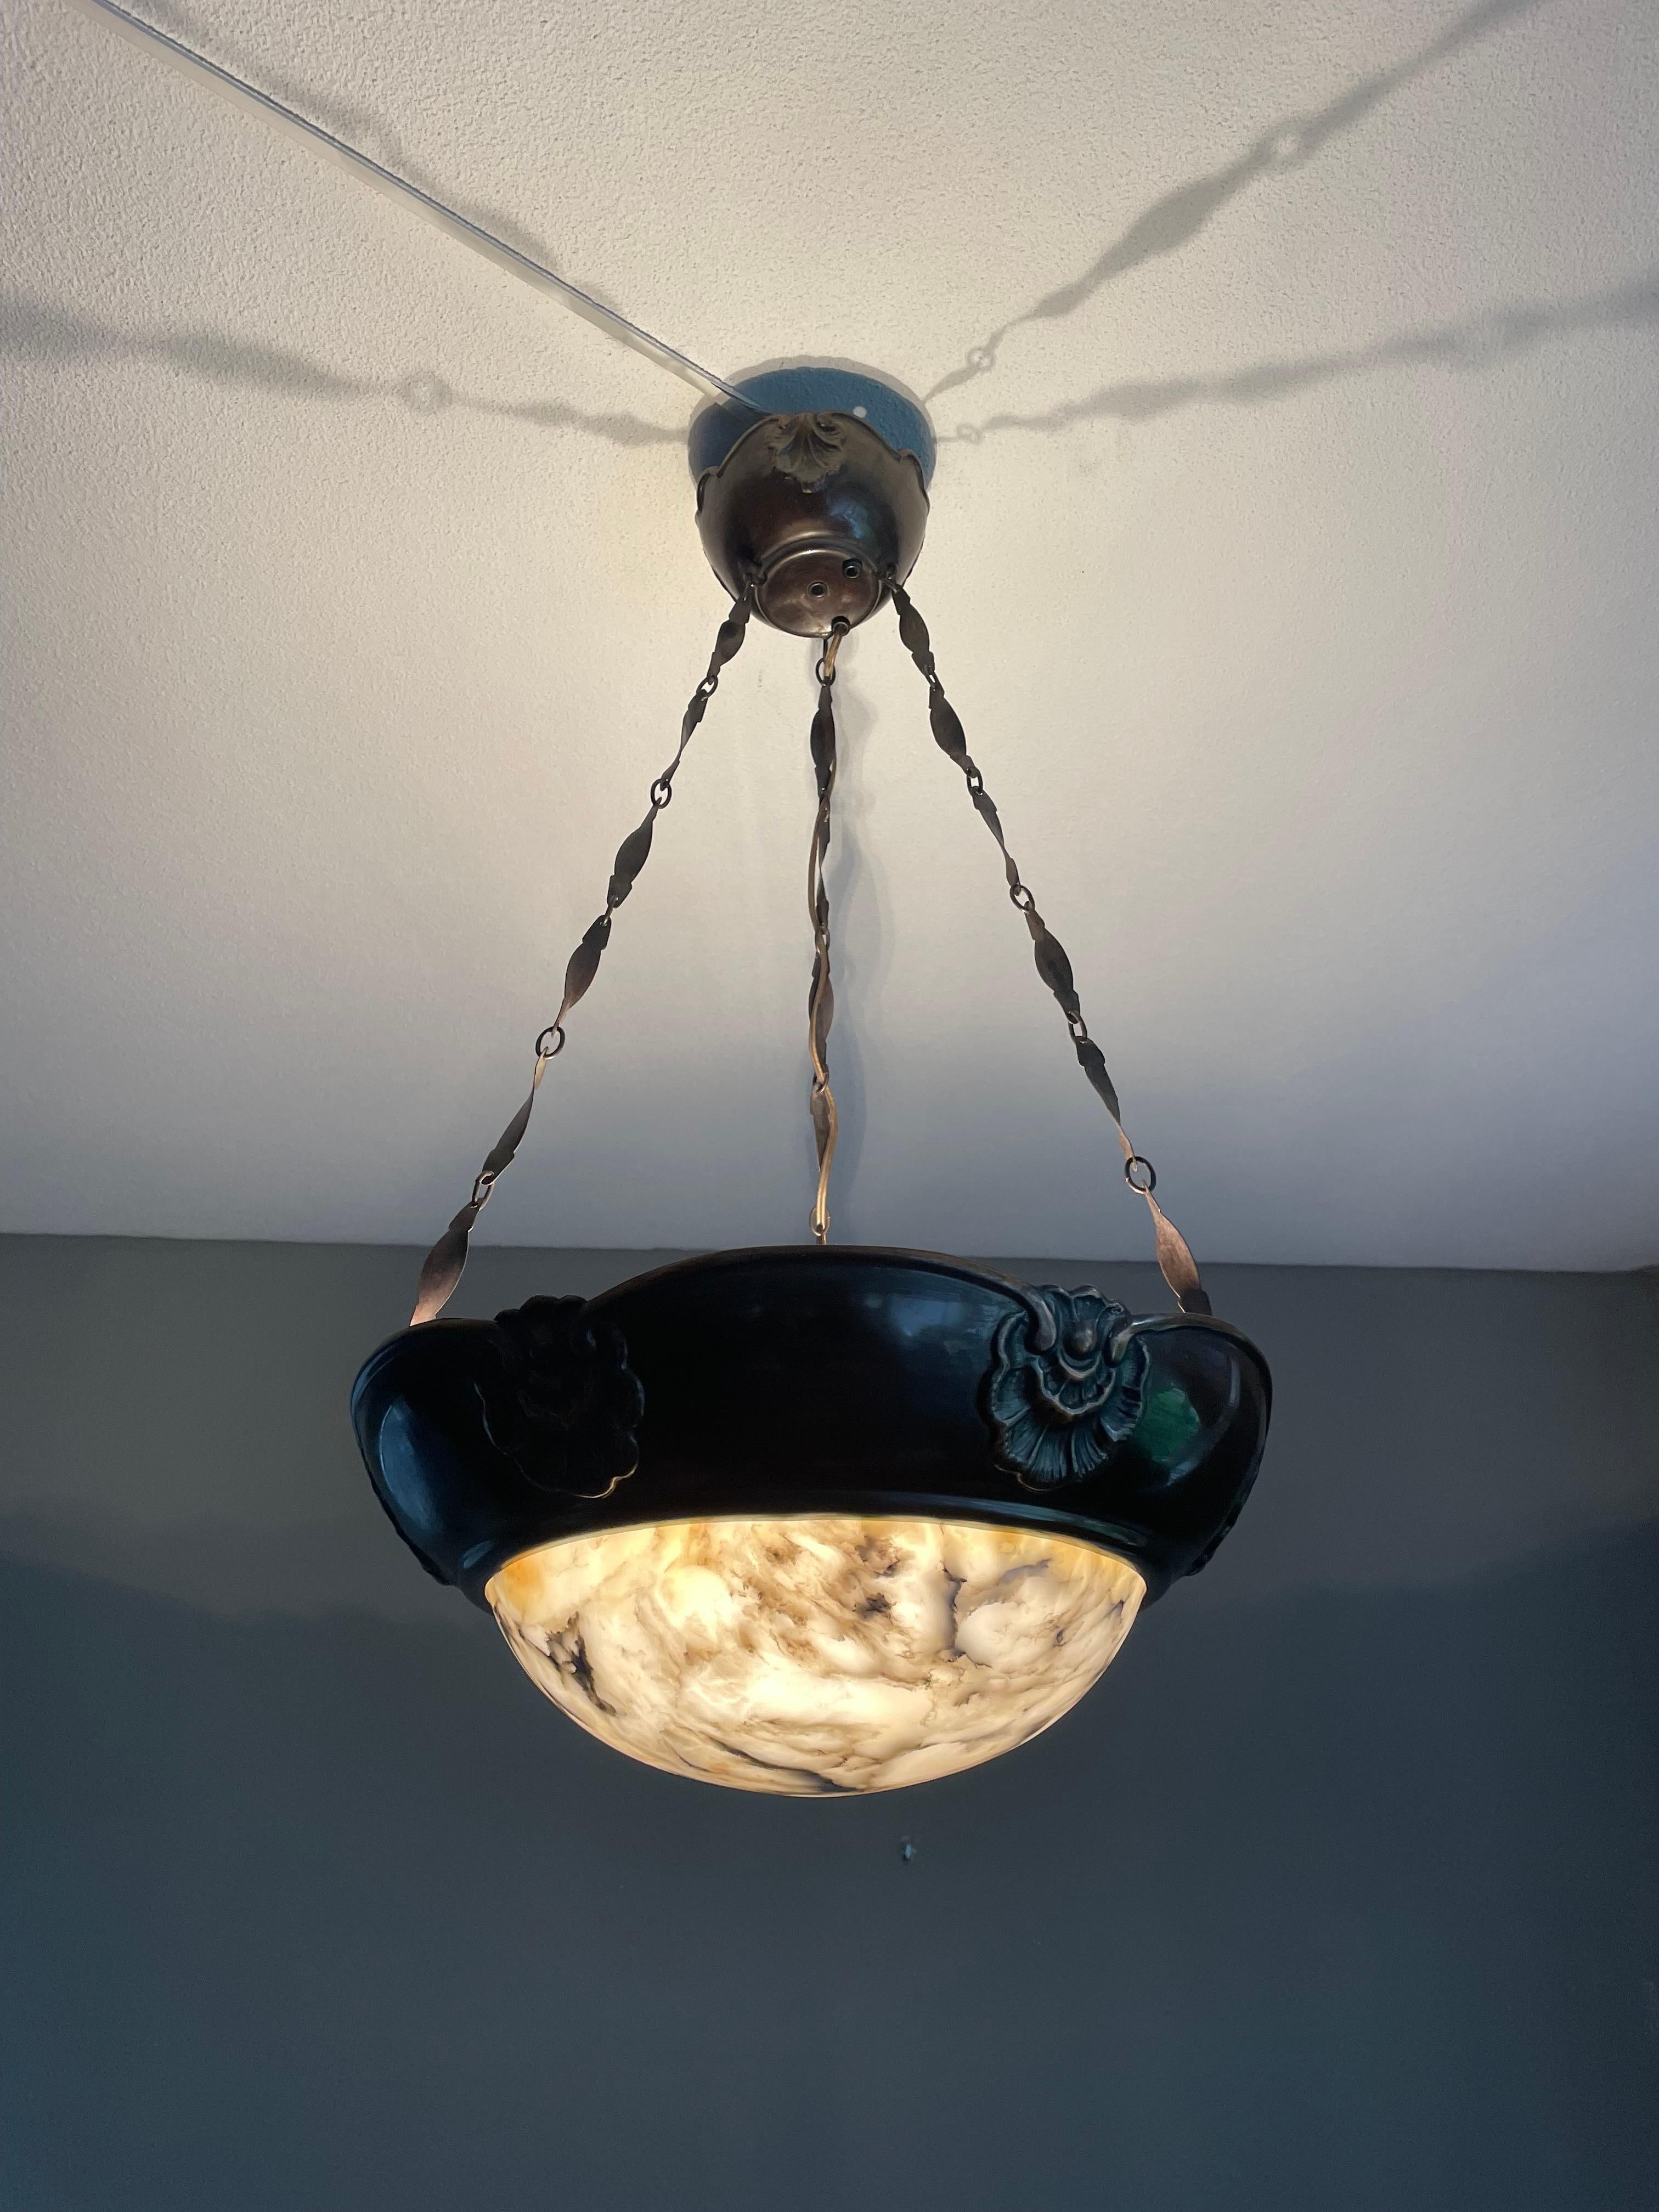 Copper and alabaster Arts & Crafts chandelier with original twirled copper chain & canopy.

With early 20th century lighting being one of our specialities, finding this rare and extraordinary pendant more than made our day. The combination of the